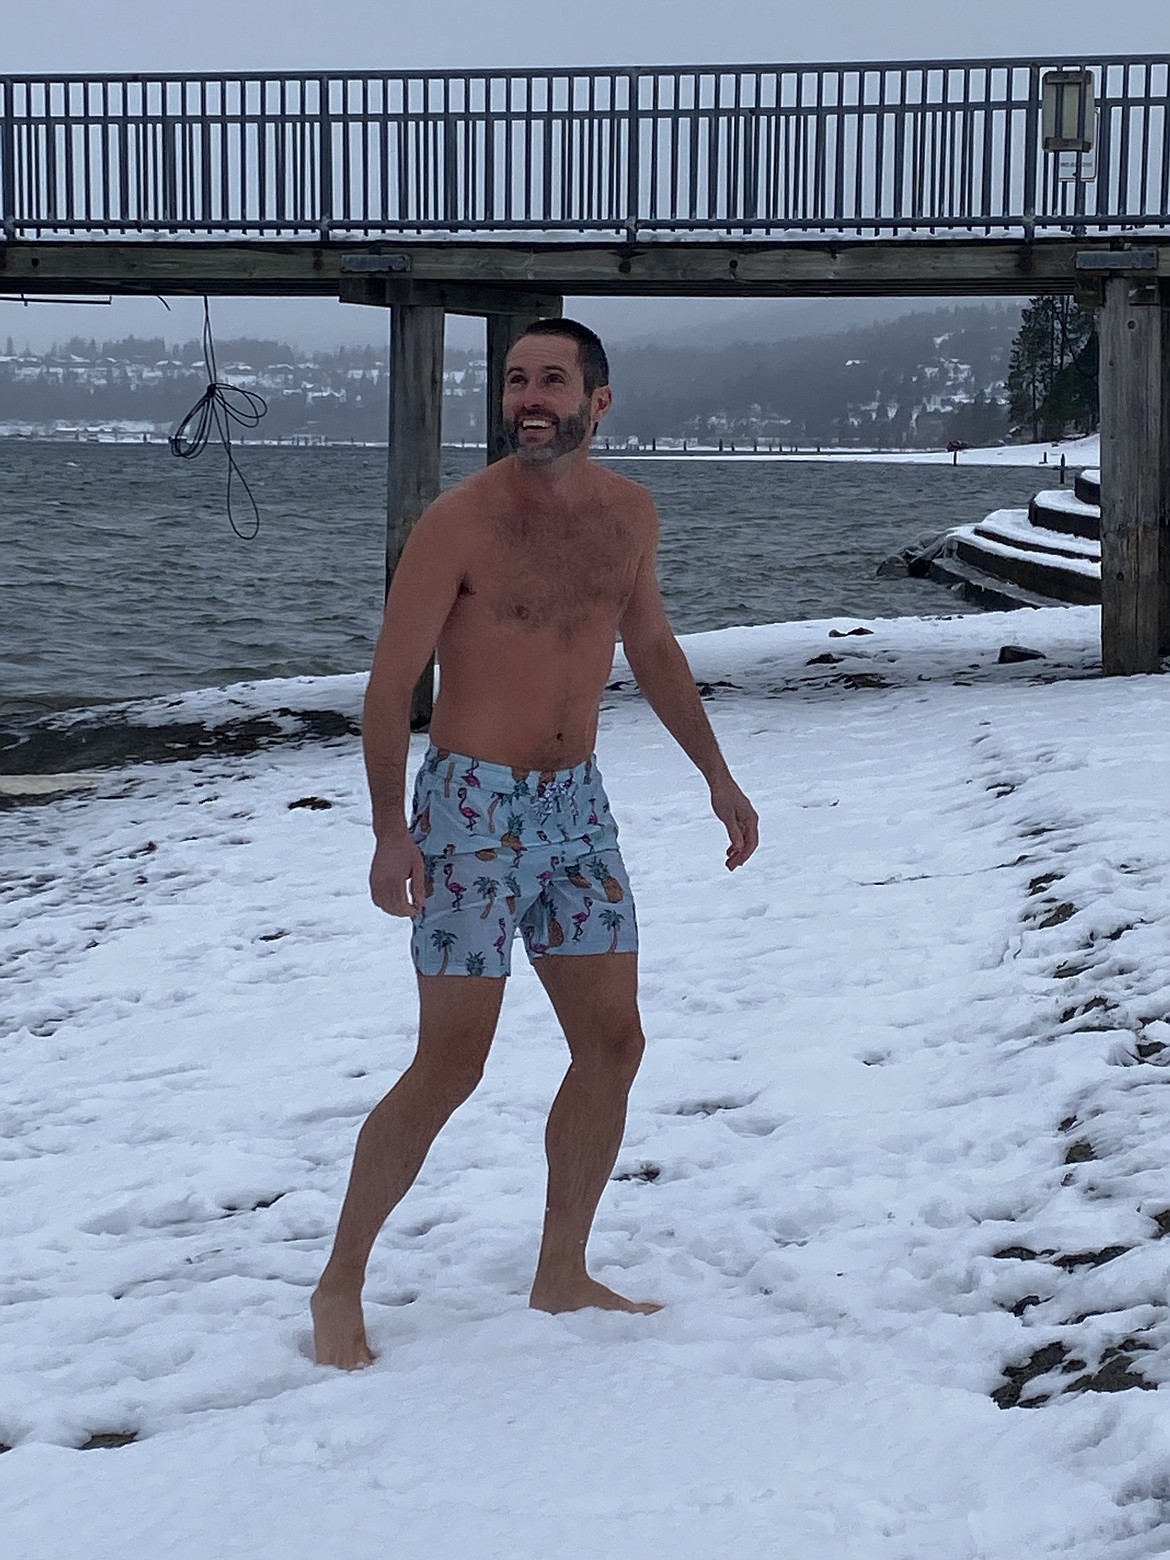 Wim Hof instructor Brock Cannon after a "nature plunge" in the icy water of Lake Coeur d'Alene on Monday. Following the dip, Cannon's skin was flushed and he felt great, he said. "Two to three minutes gives you all the physiological benefits," Cannon said. "Nature plunging" requires special preparation and is part of practicing the Wim Hof method, which combines cold immersion, breathing techniques and meditation.